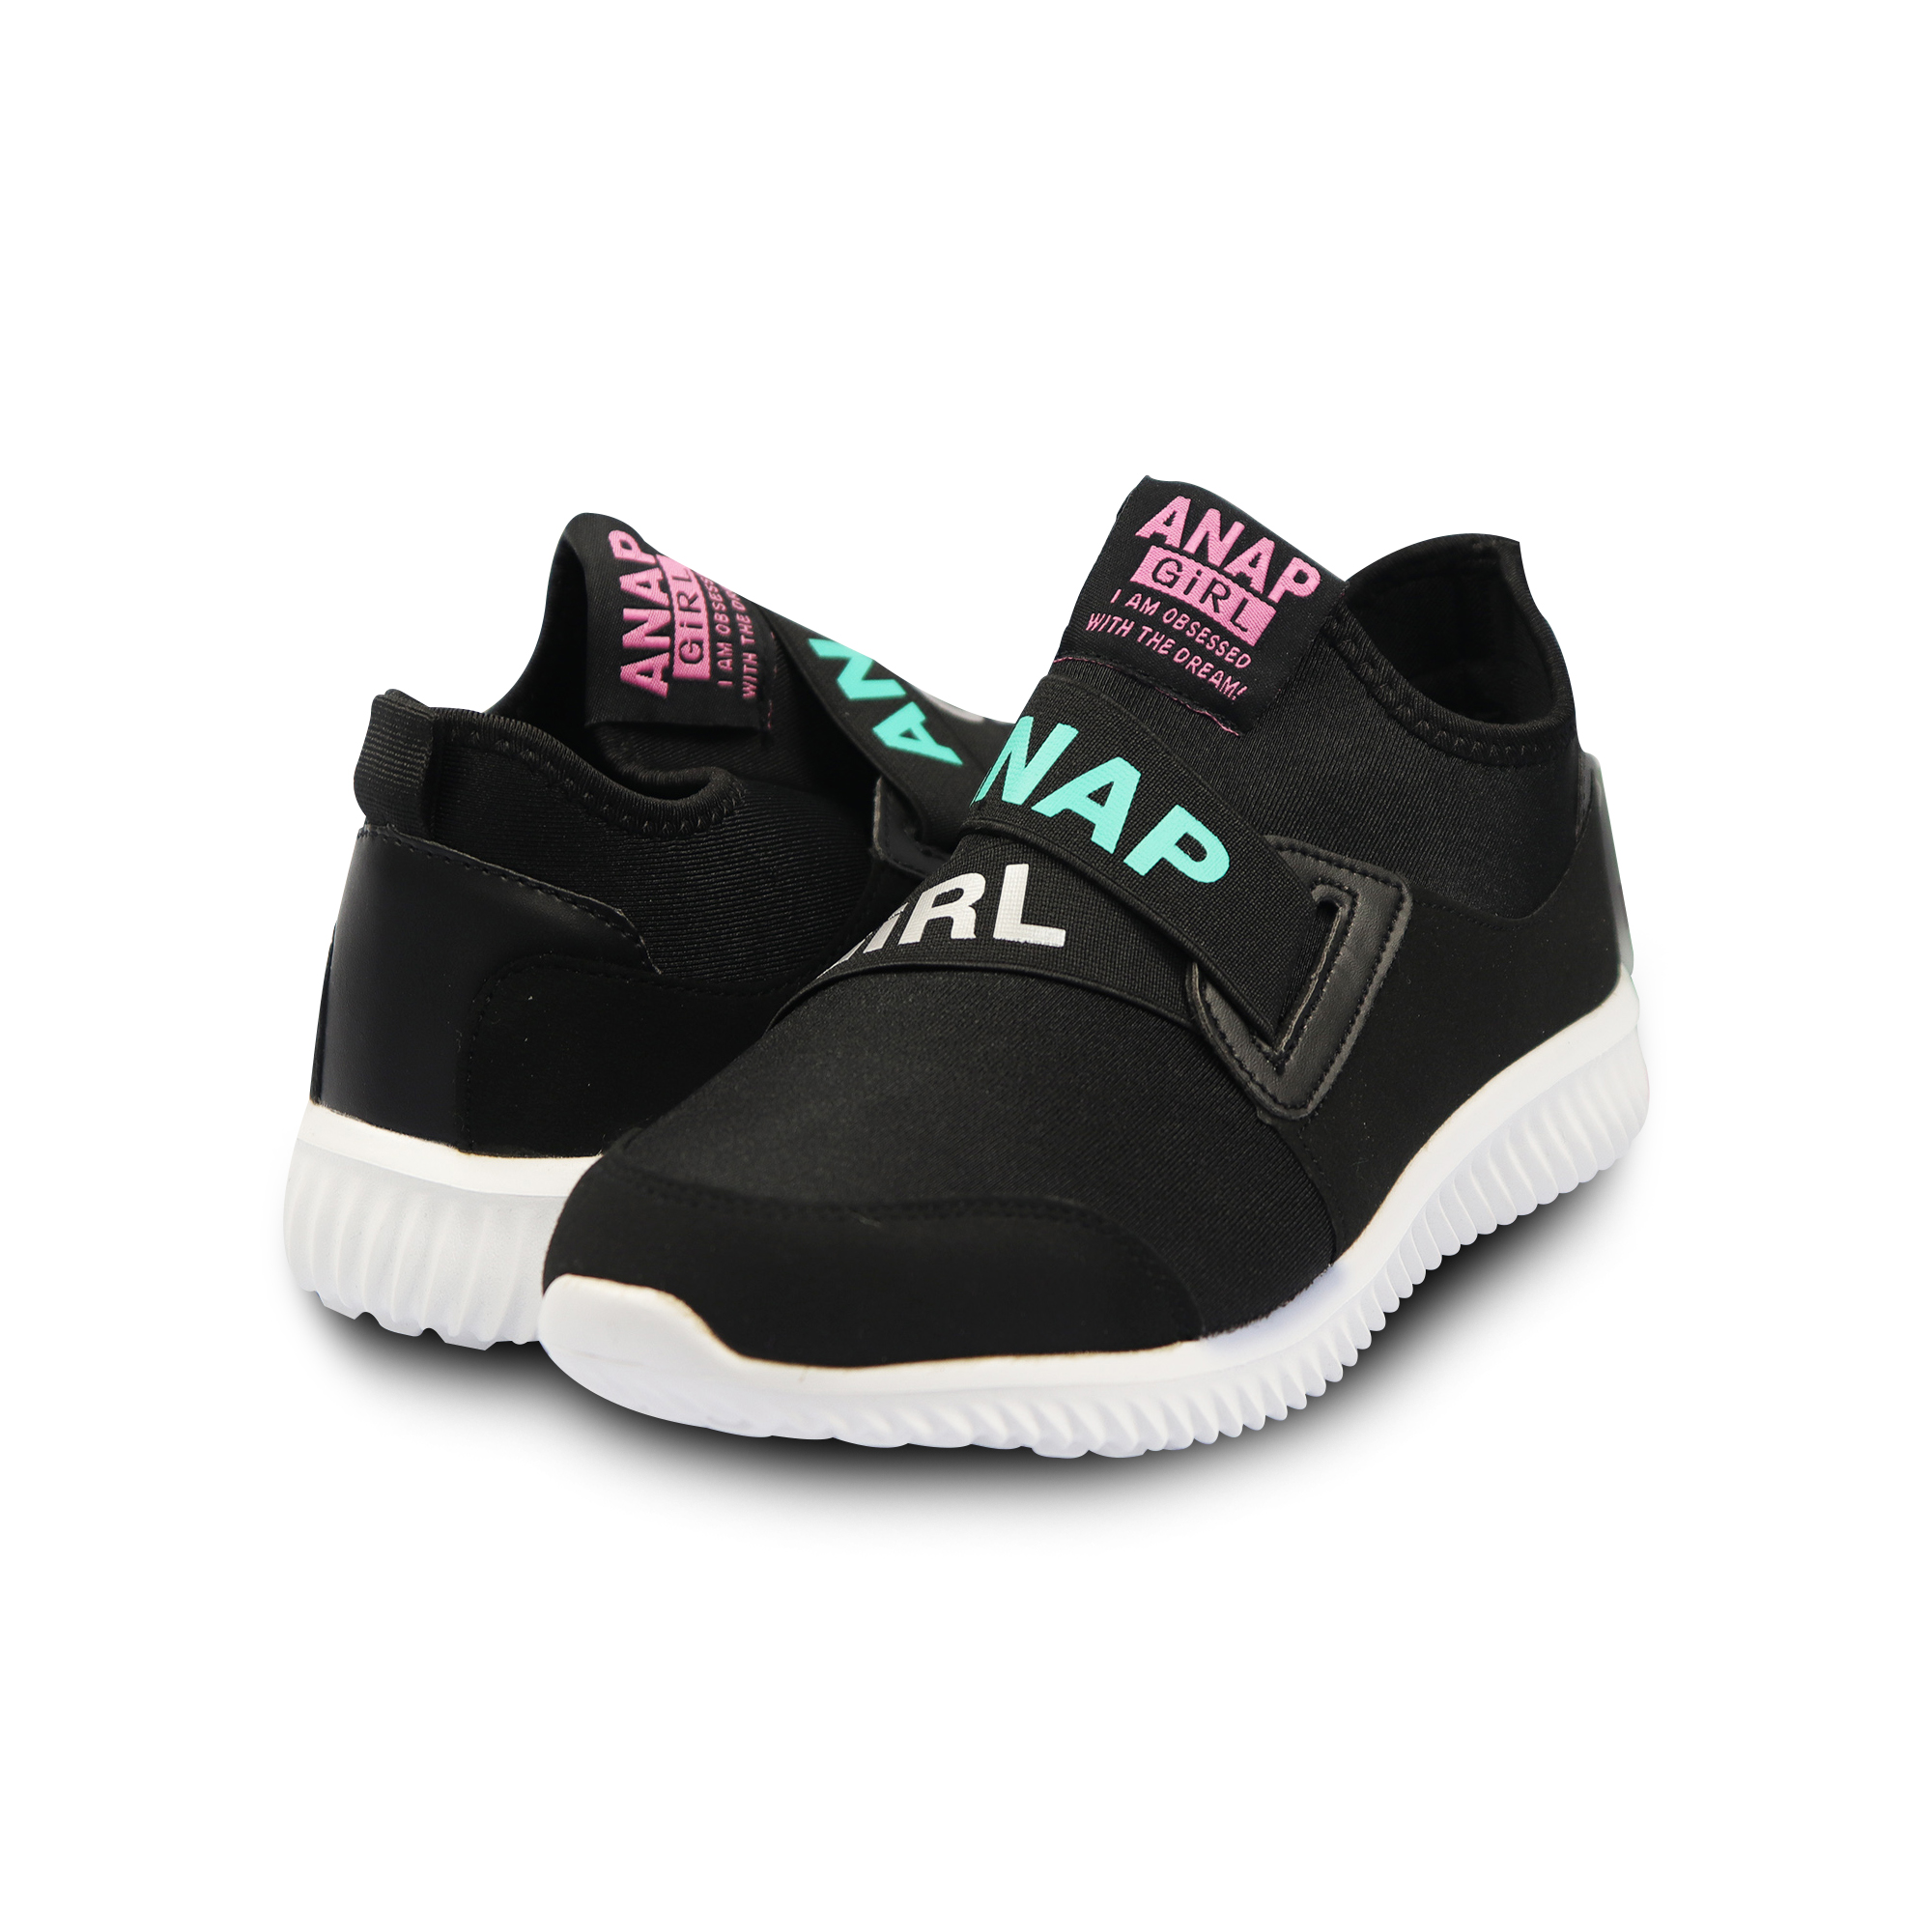 Anap Girl Kids Shoes: Buy sell online 